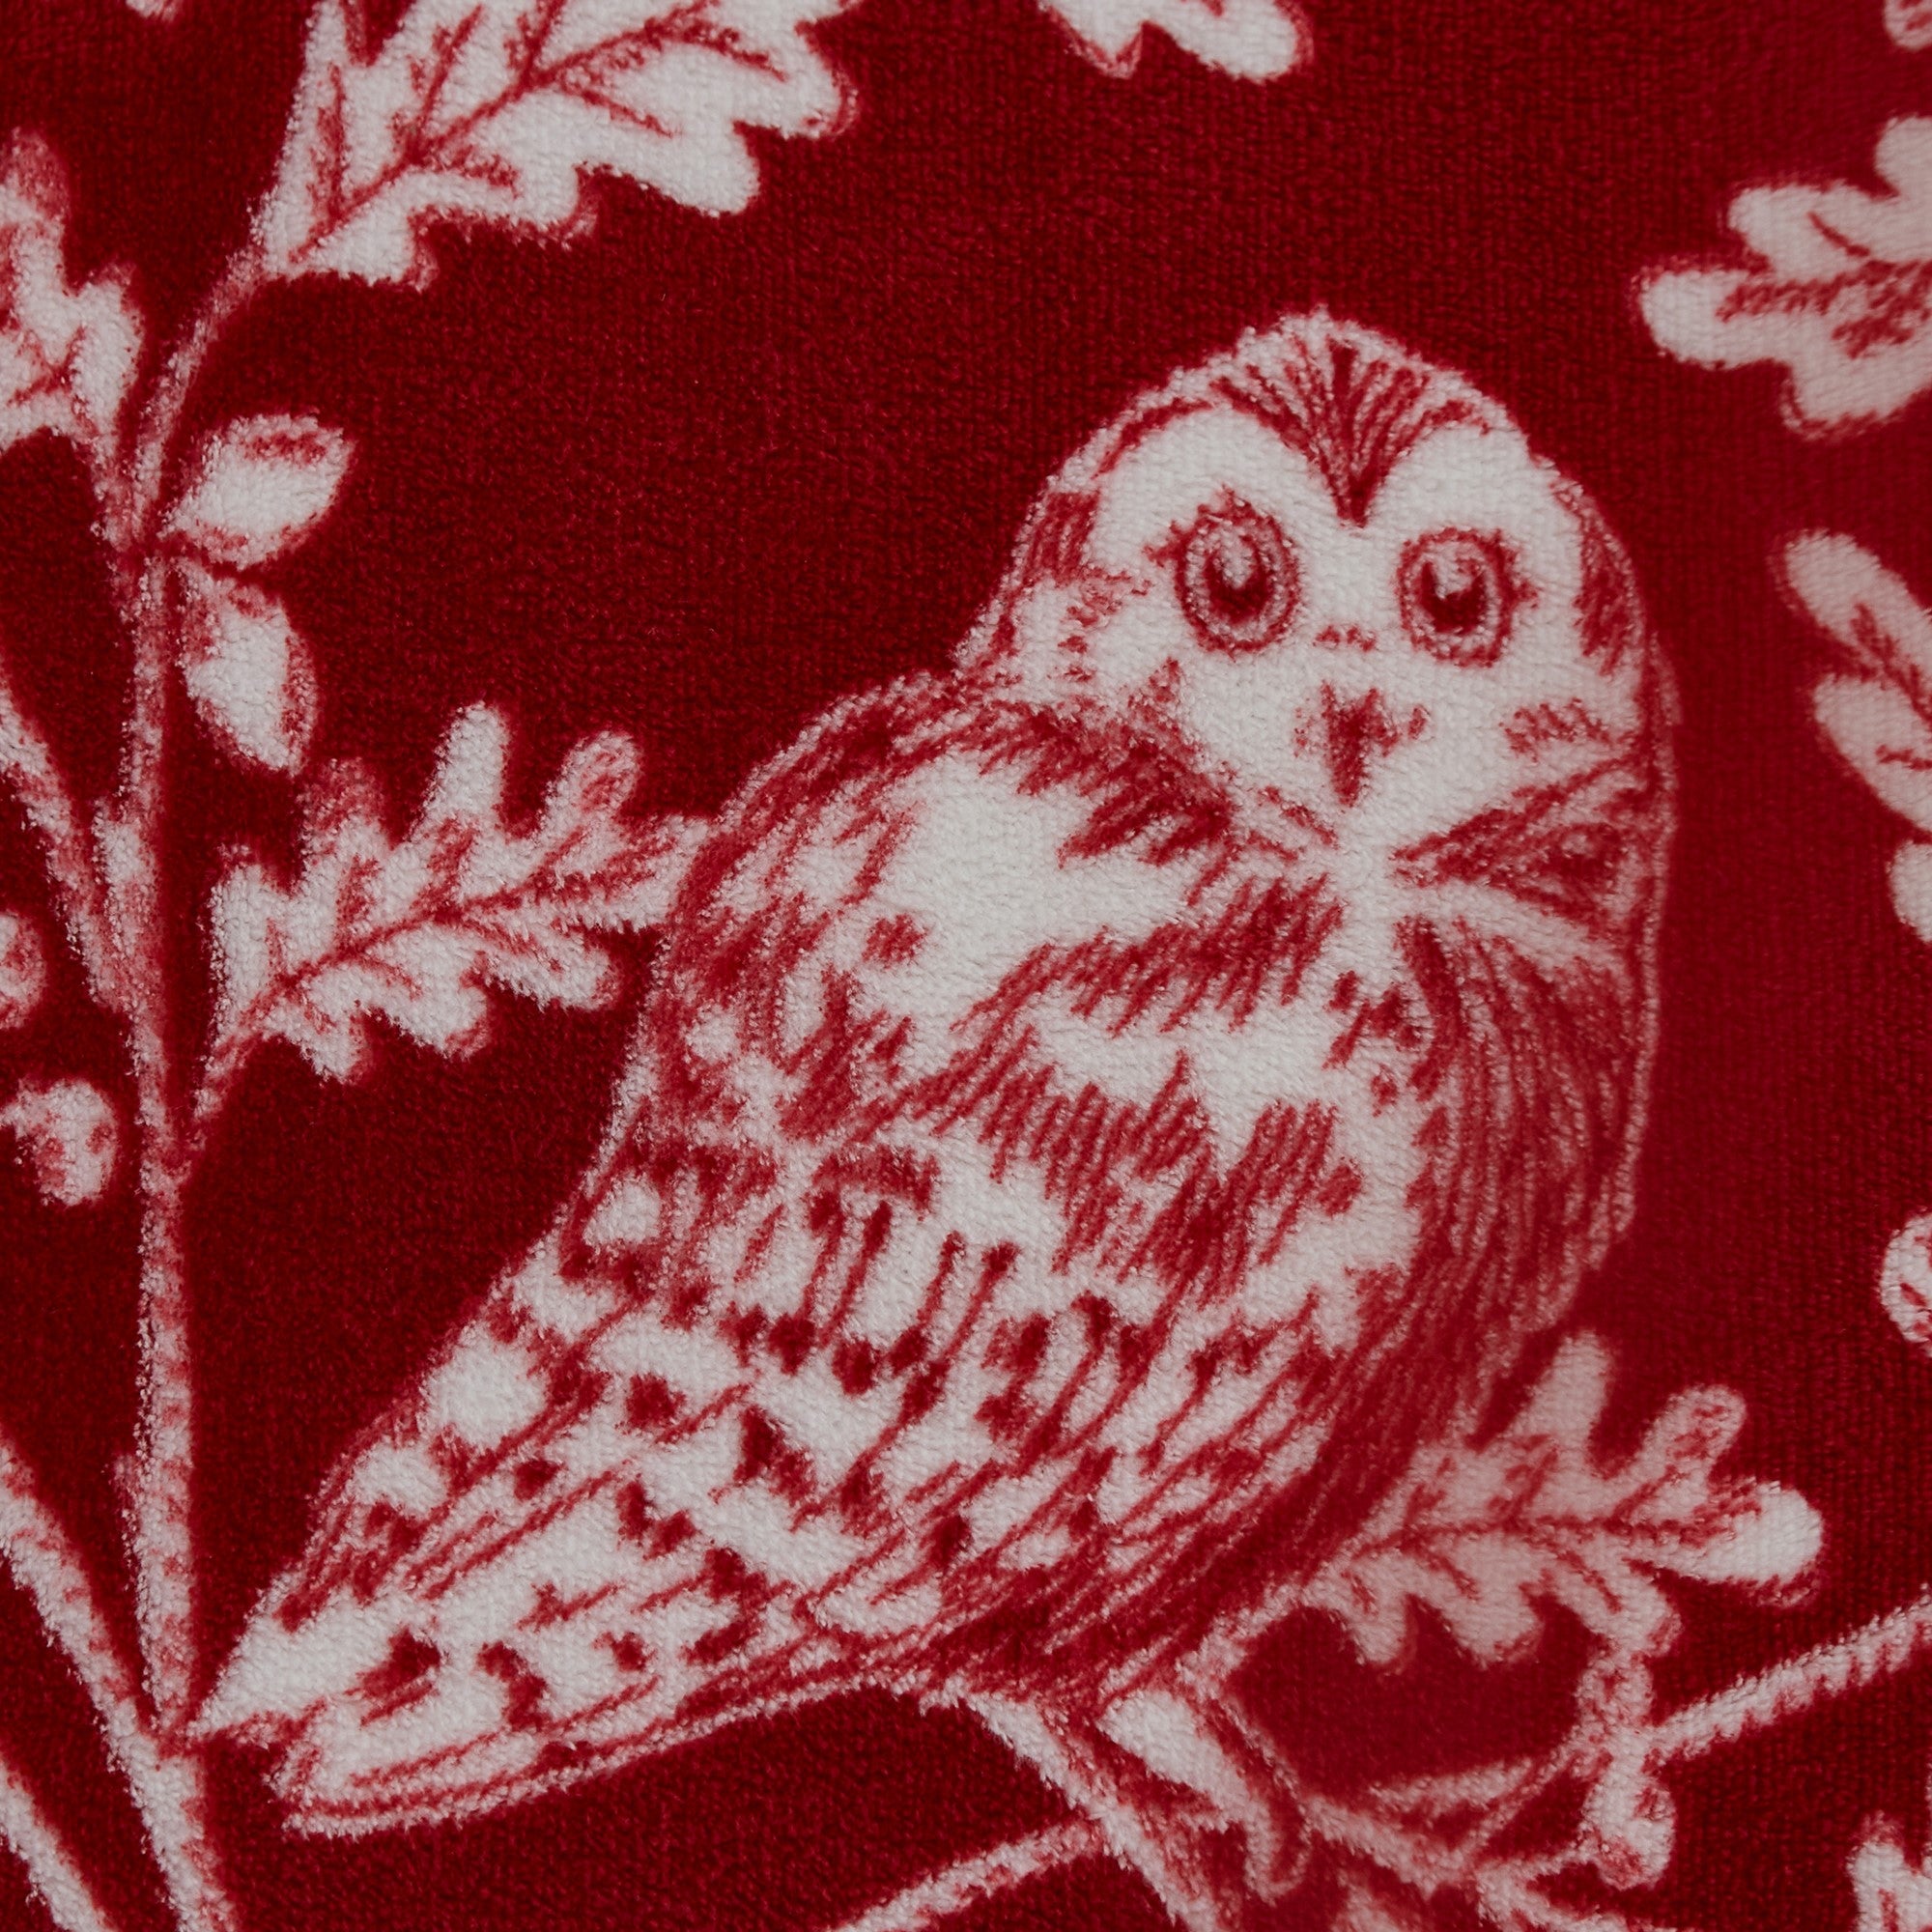 Duvet Cover Set Woodland Owls by D&D Lodge in Red